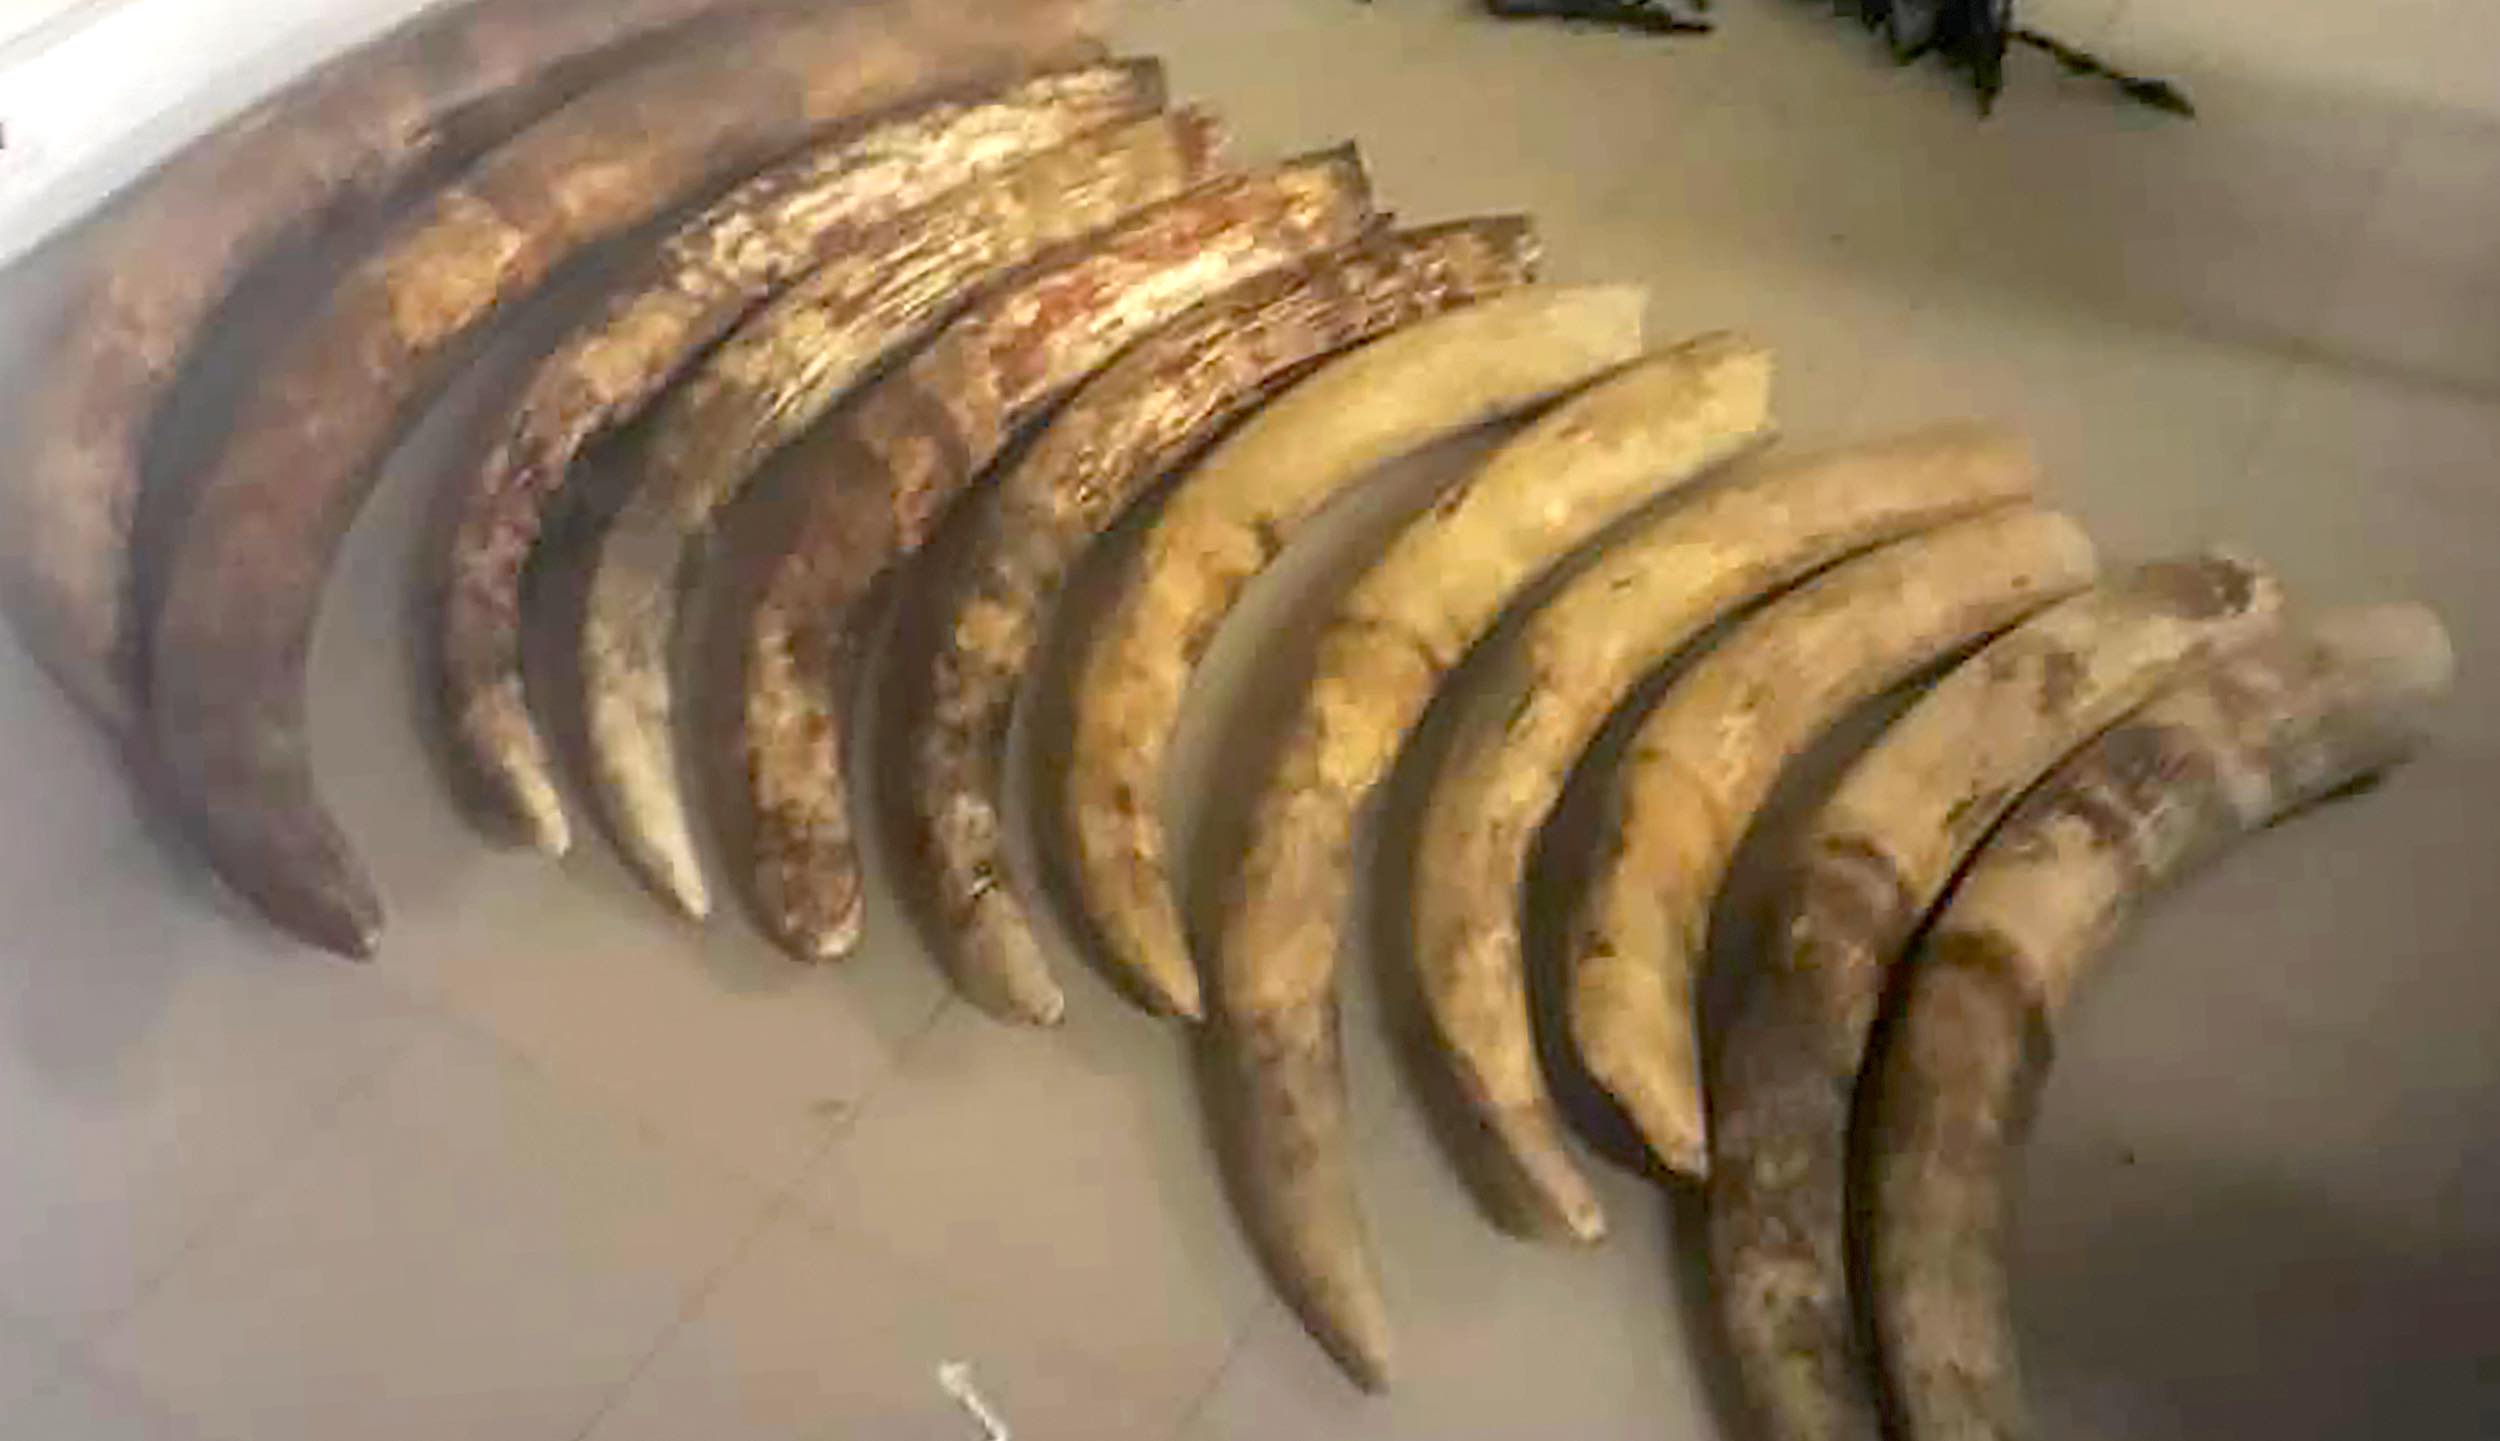 A collection of seized elephant tusks resting on a table.